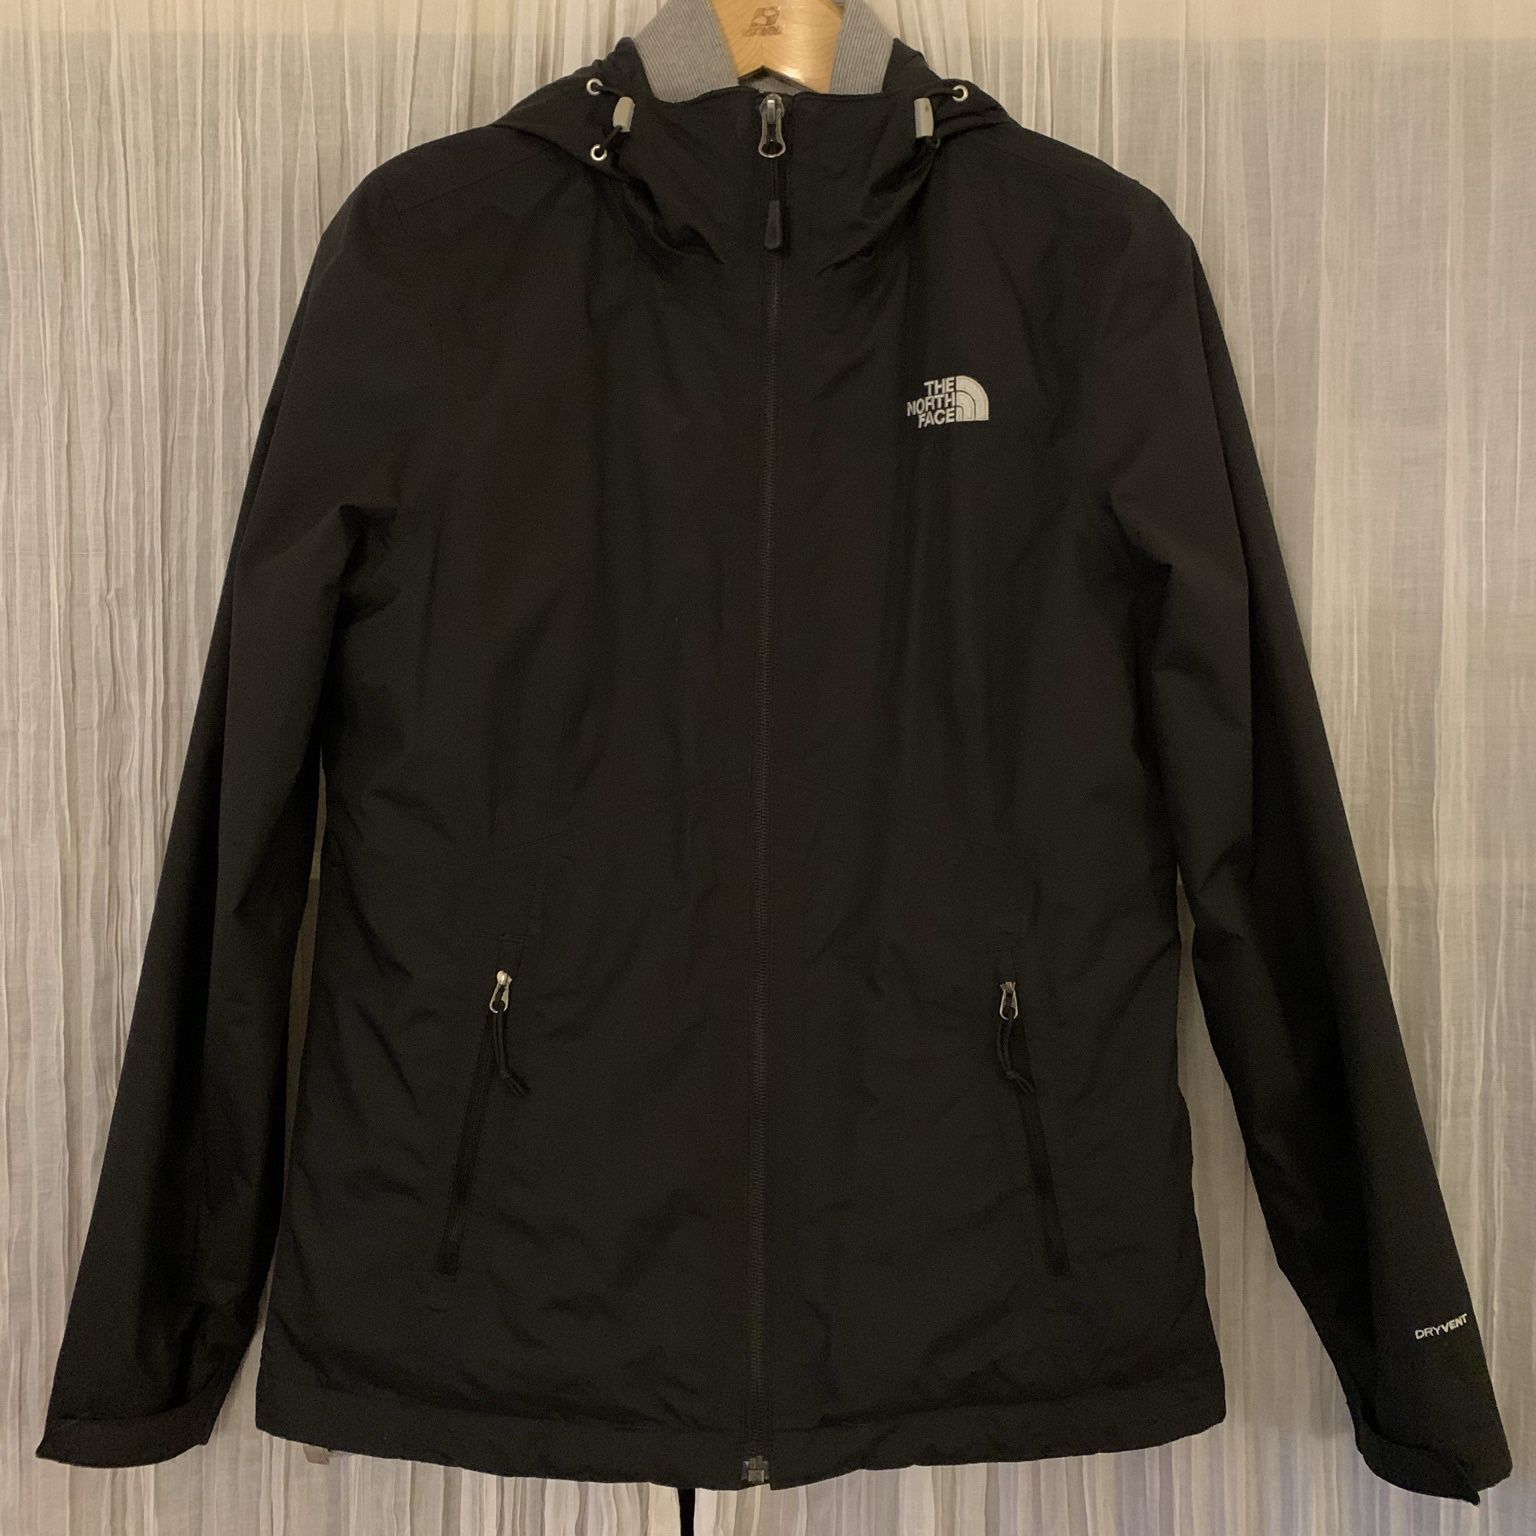 3 in 1 The North Face Rain Jacket